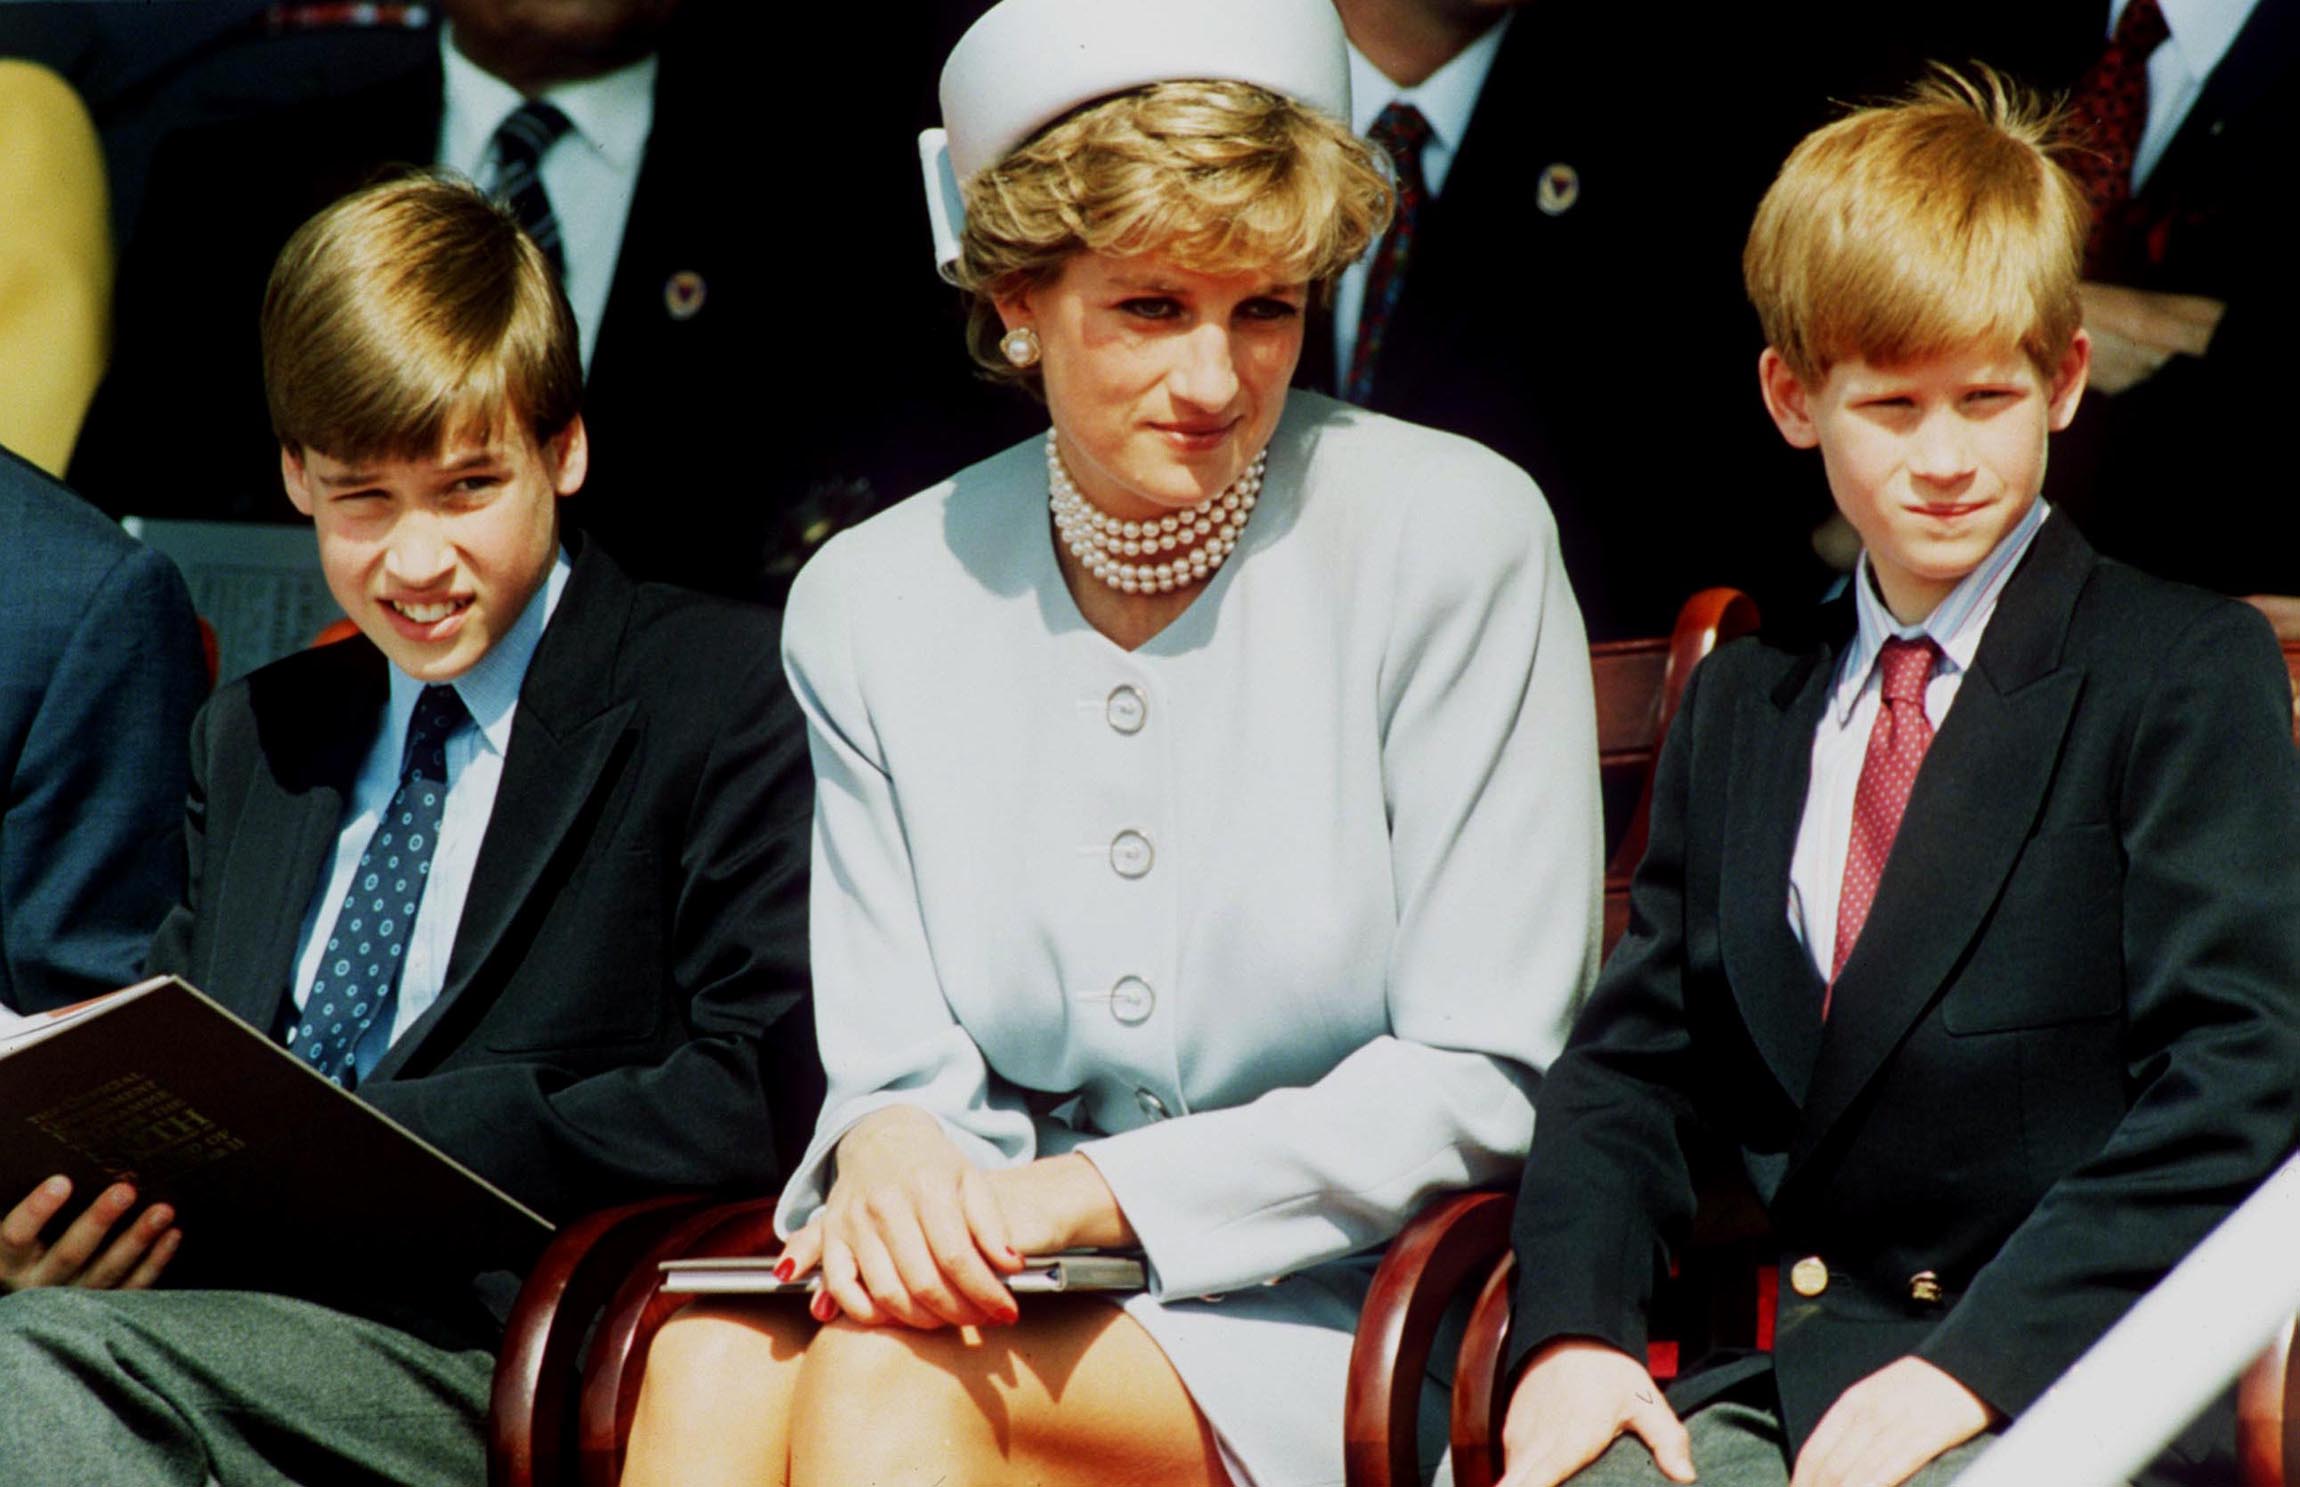 Princess Diana sits in between her sons, Prince William and Prince Harry, during a Remembrance Day service in 1995